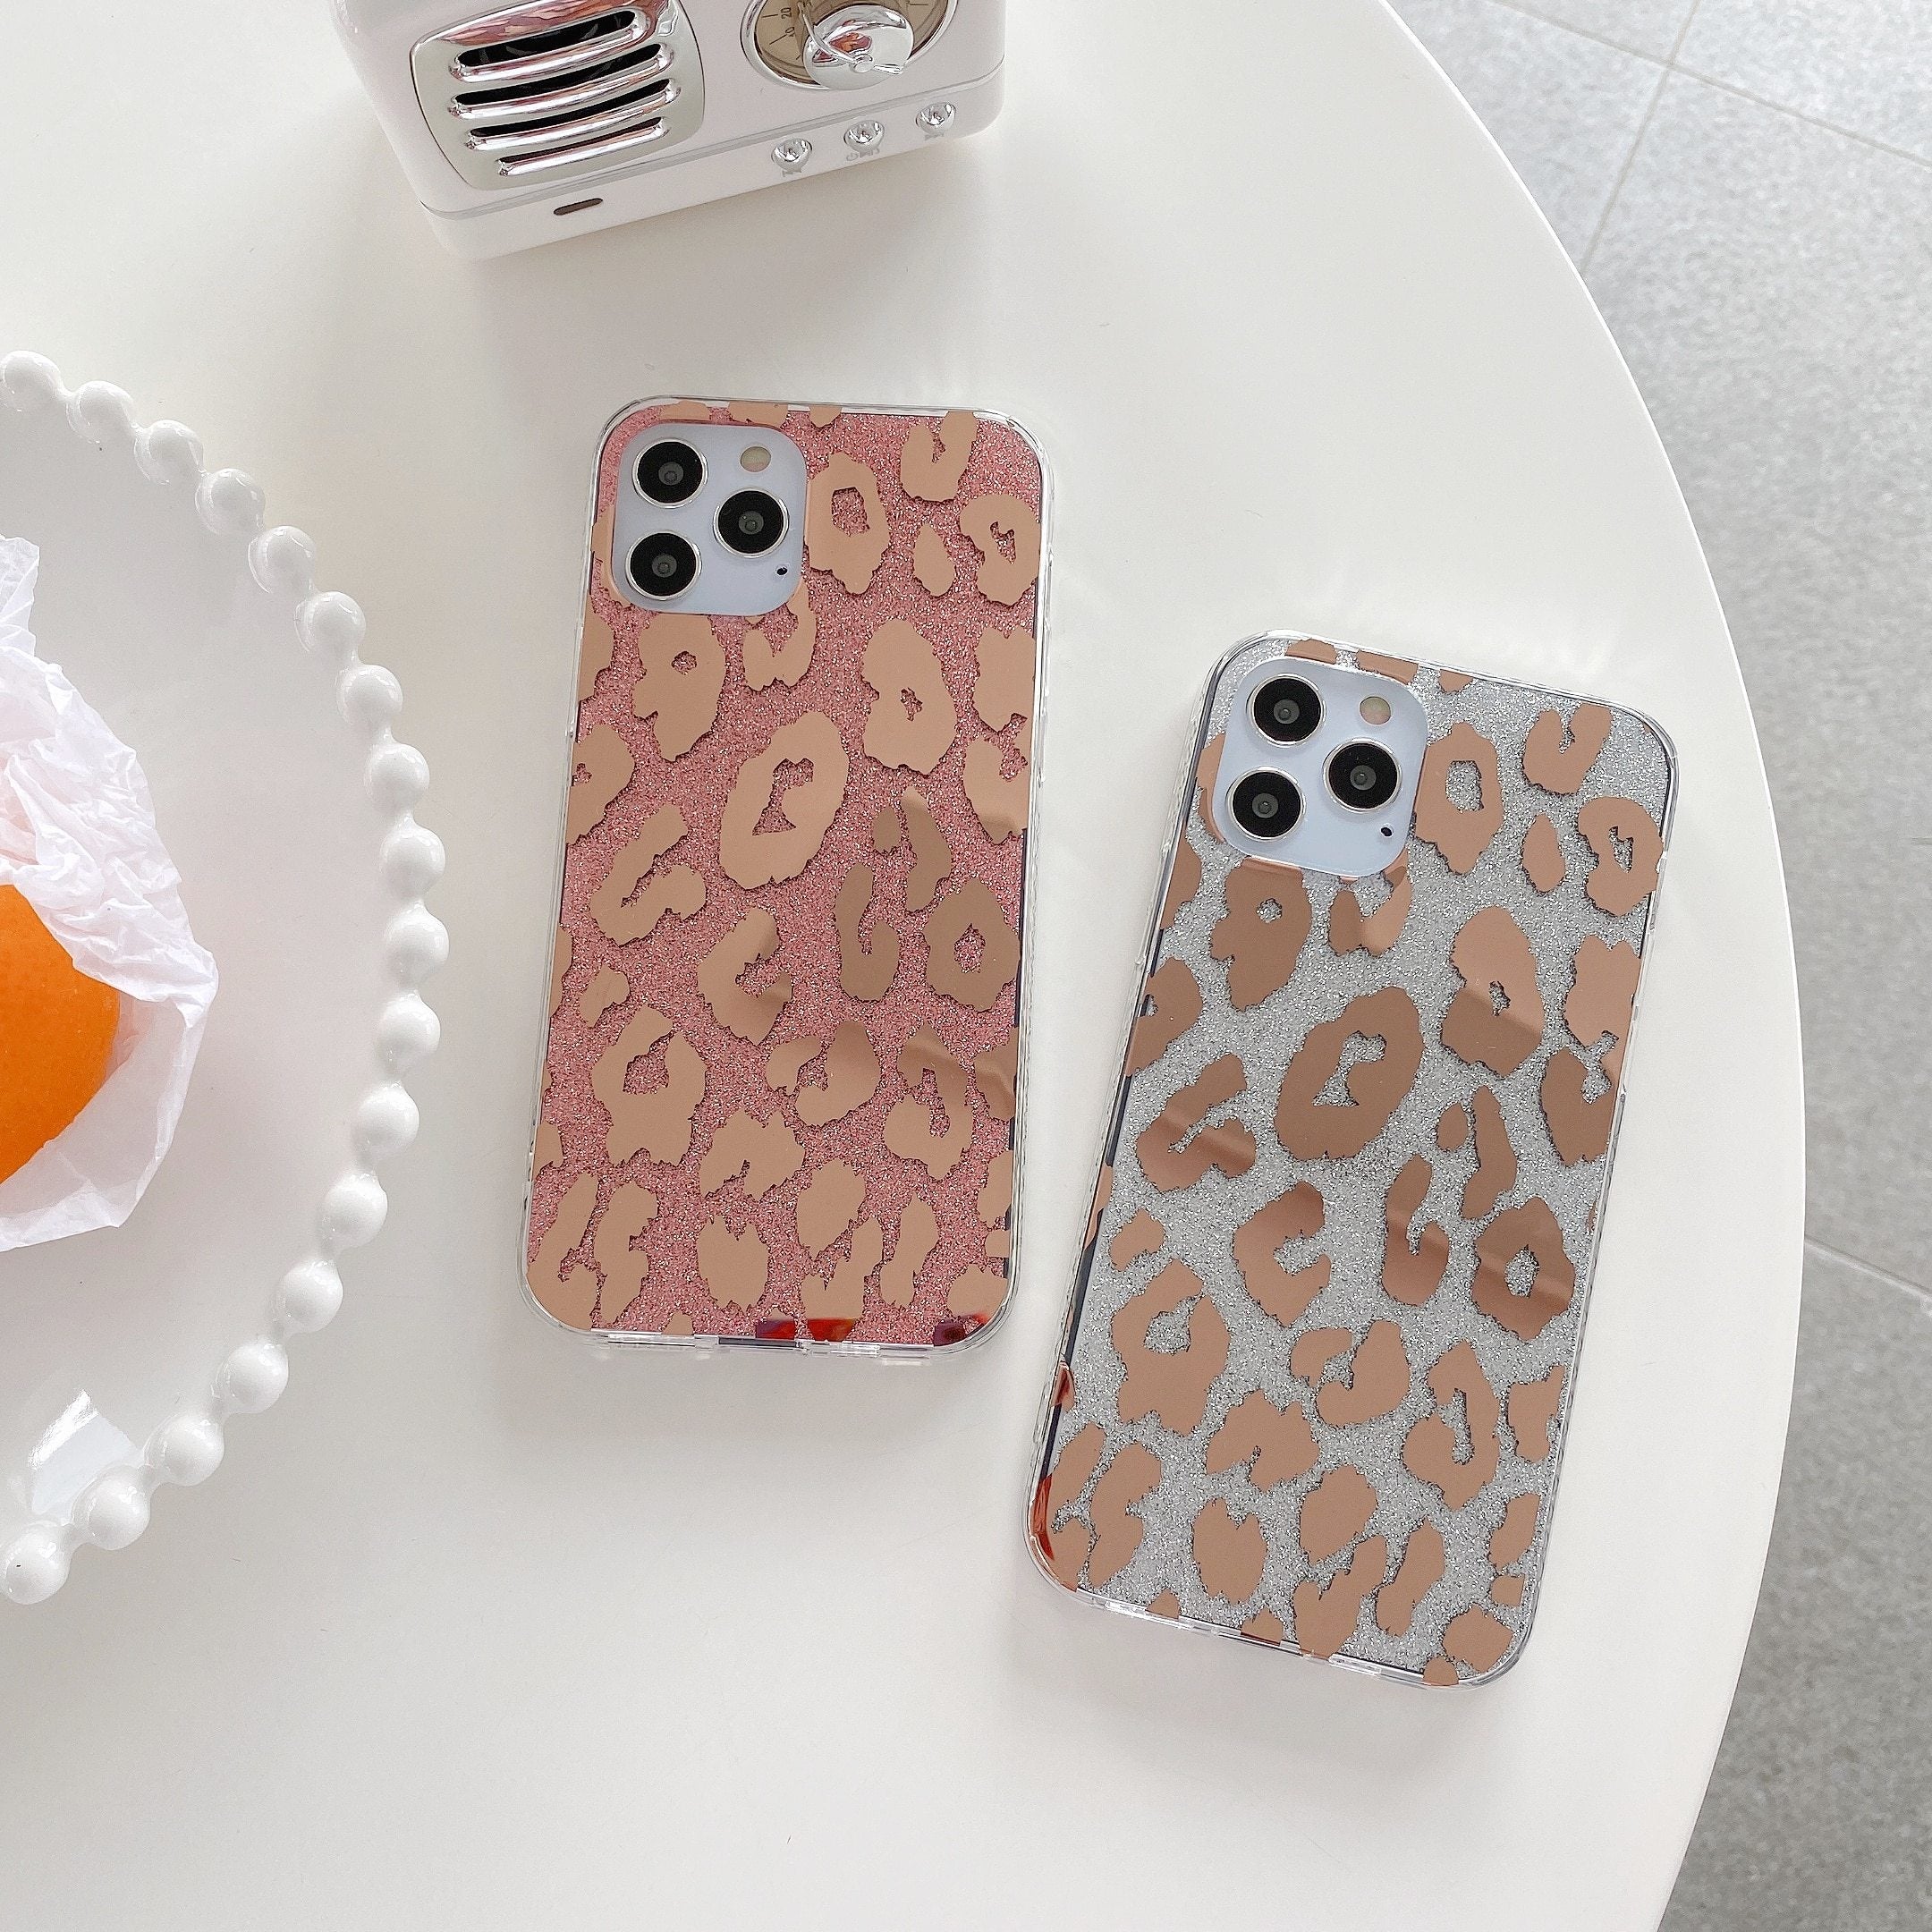 Case Luxury Leopard Soft Shockproof Back Cover For iPhone